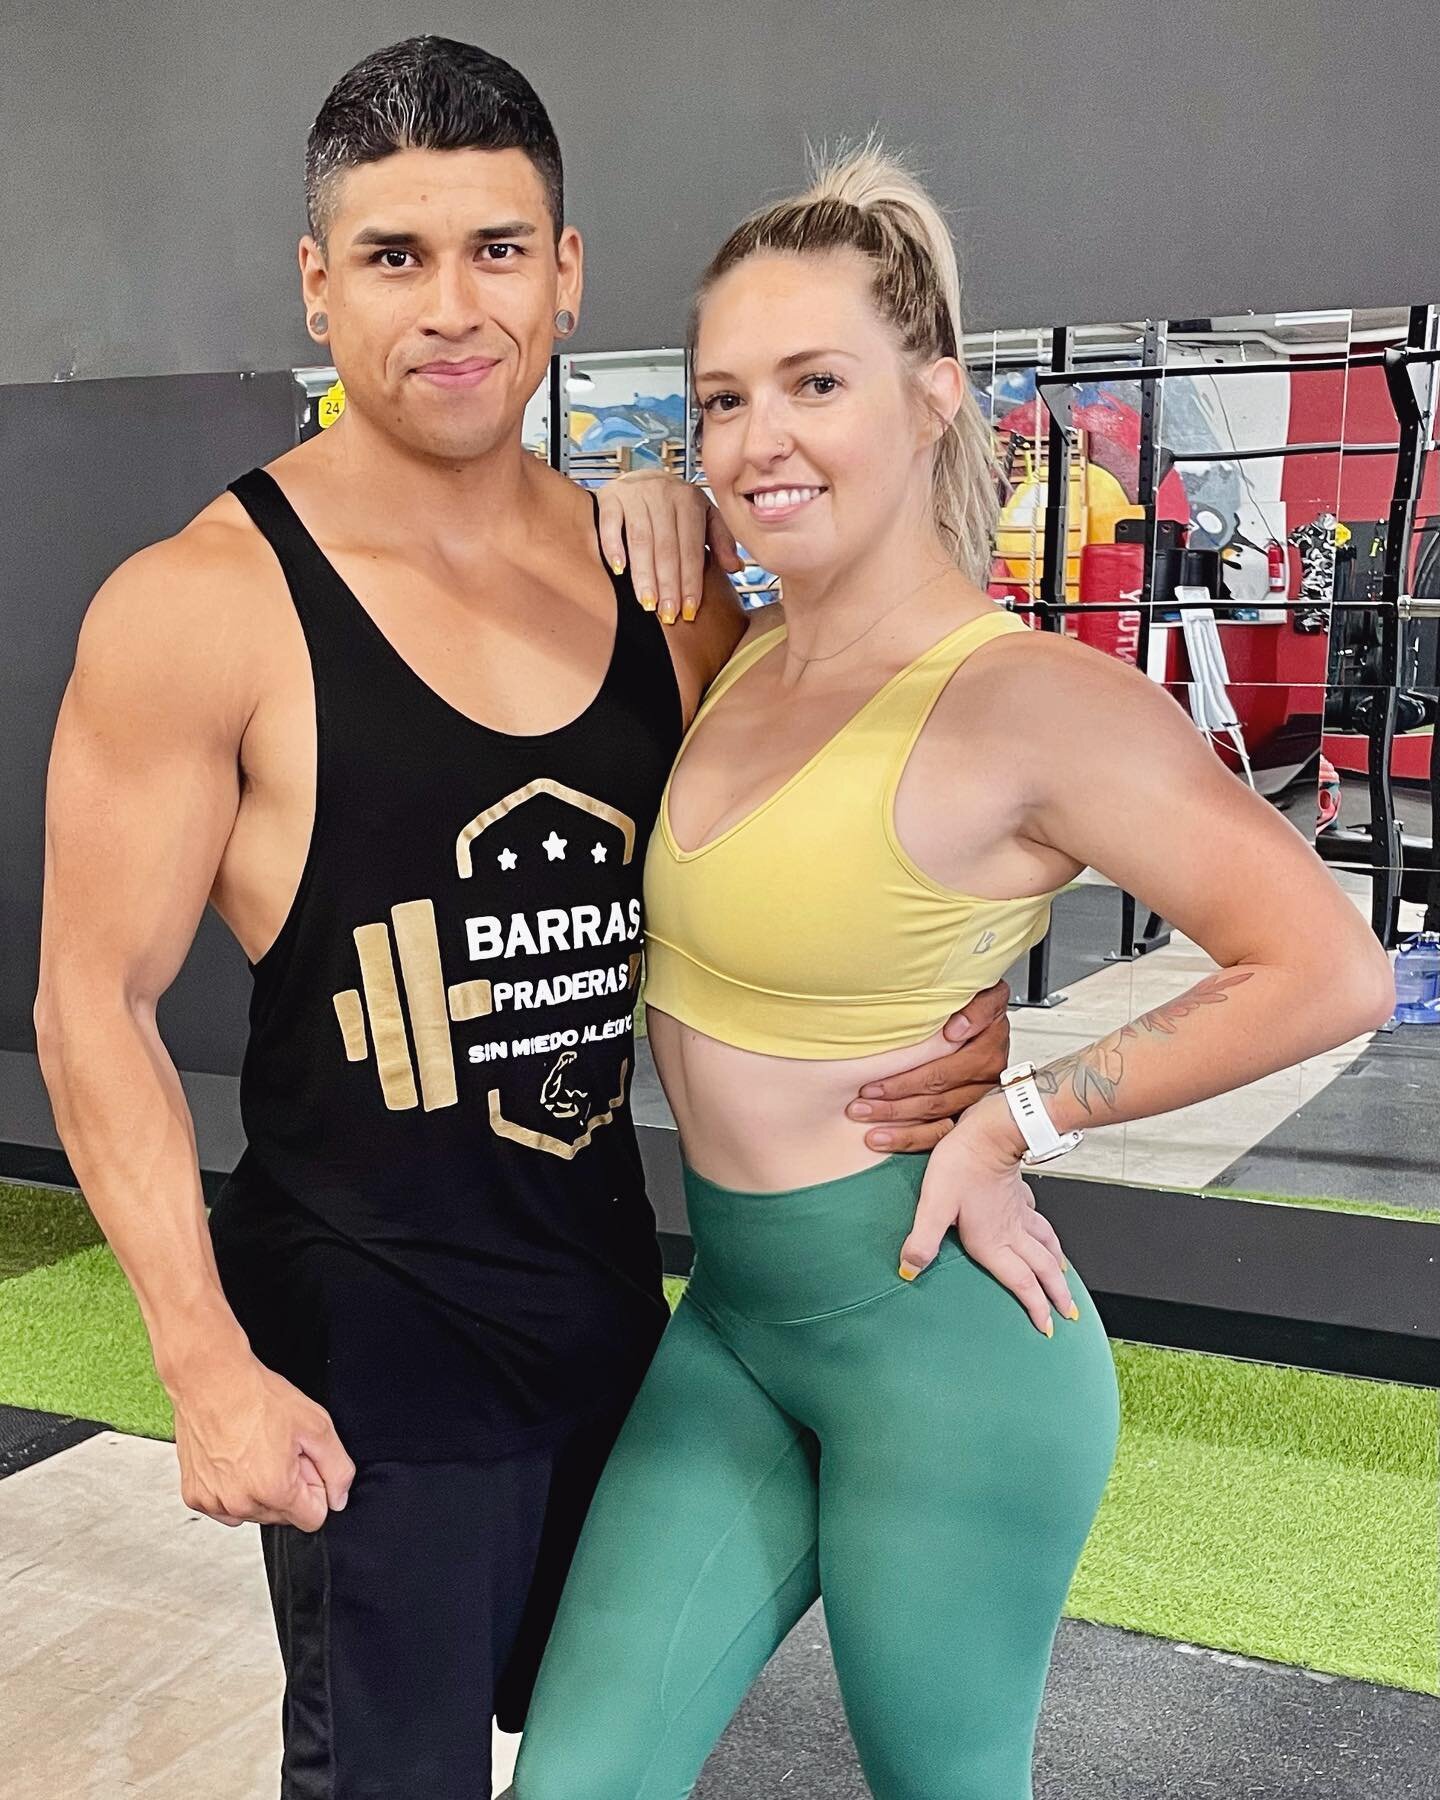 The faces behind The Pineapple Pump Project, Jairo and Paige. 
Our individual accounts are:
@jairo_lopezz.303 and @saltybitchfitness
&hellip;
#fitnessjourney #getfitstayfit #gettoknowus #fitnesscoach #onlinefitnesscoaching #fitnesstrainer #arvadacolo